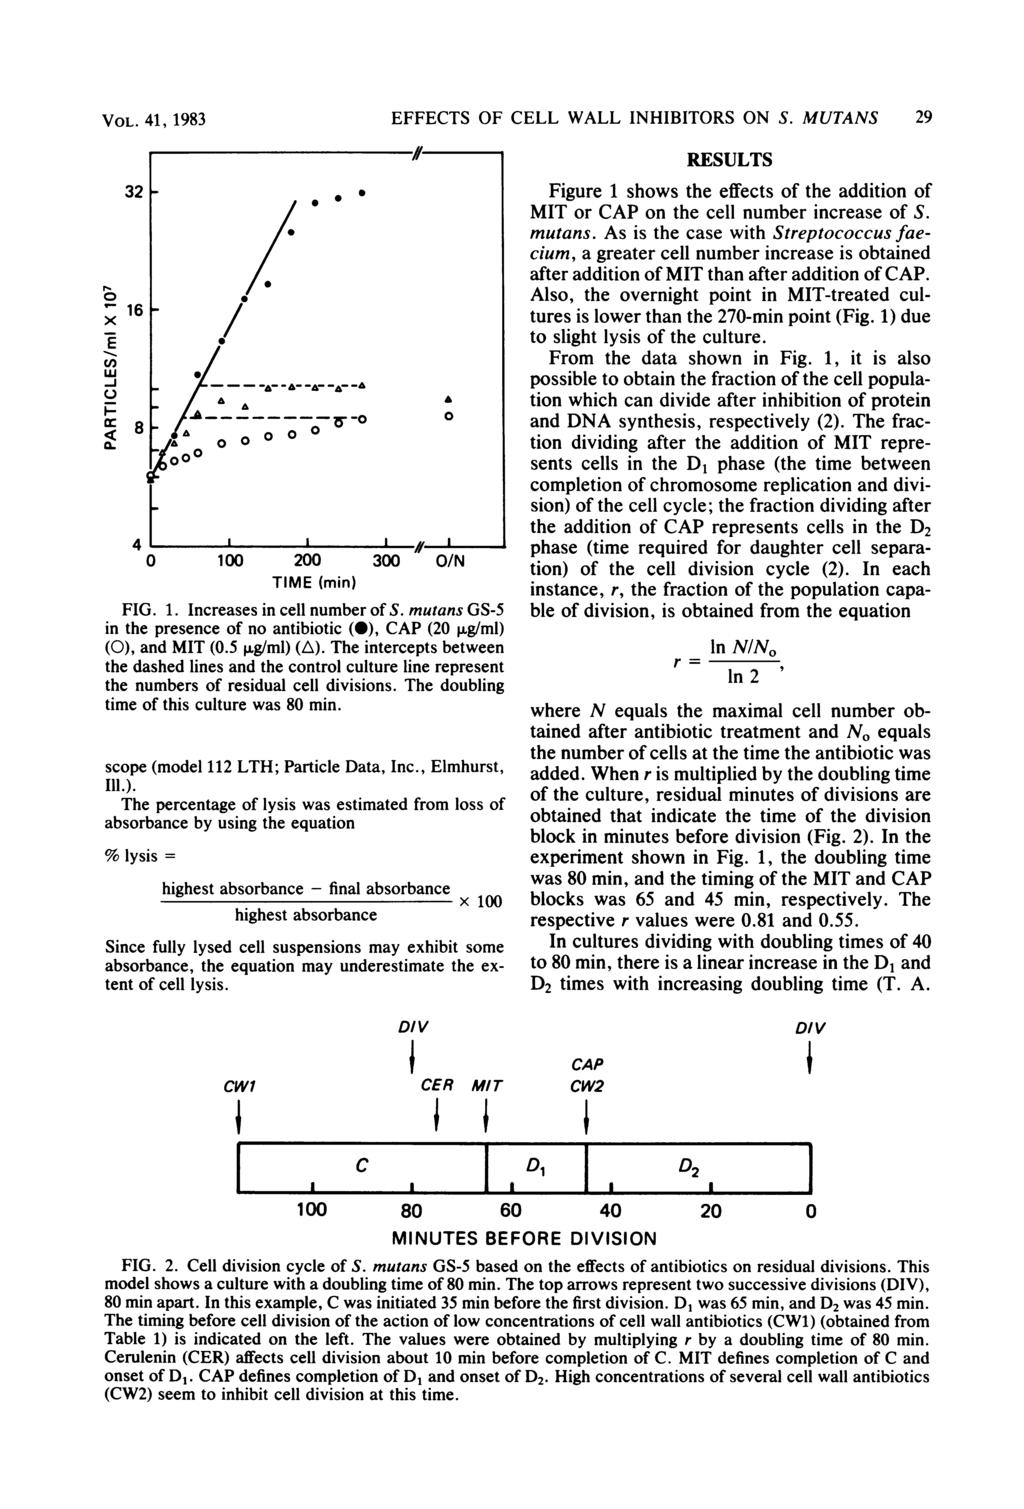 VOL. 41, 1983 x E w-i 32 161 8 4 I I I A( I- 1 2 3 O/N TIME (min) FIG. 1. Increases in cell number of S. mutans GS-5 in the presence of no antibiotic (), CAP (2,ug/ml) (), and MIT (.5,ug/ml) (A).